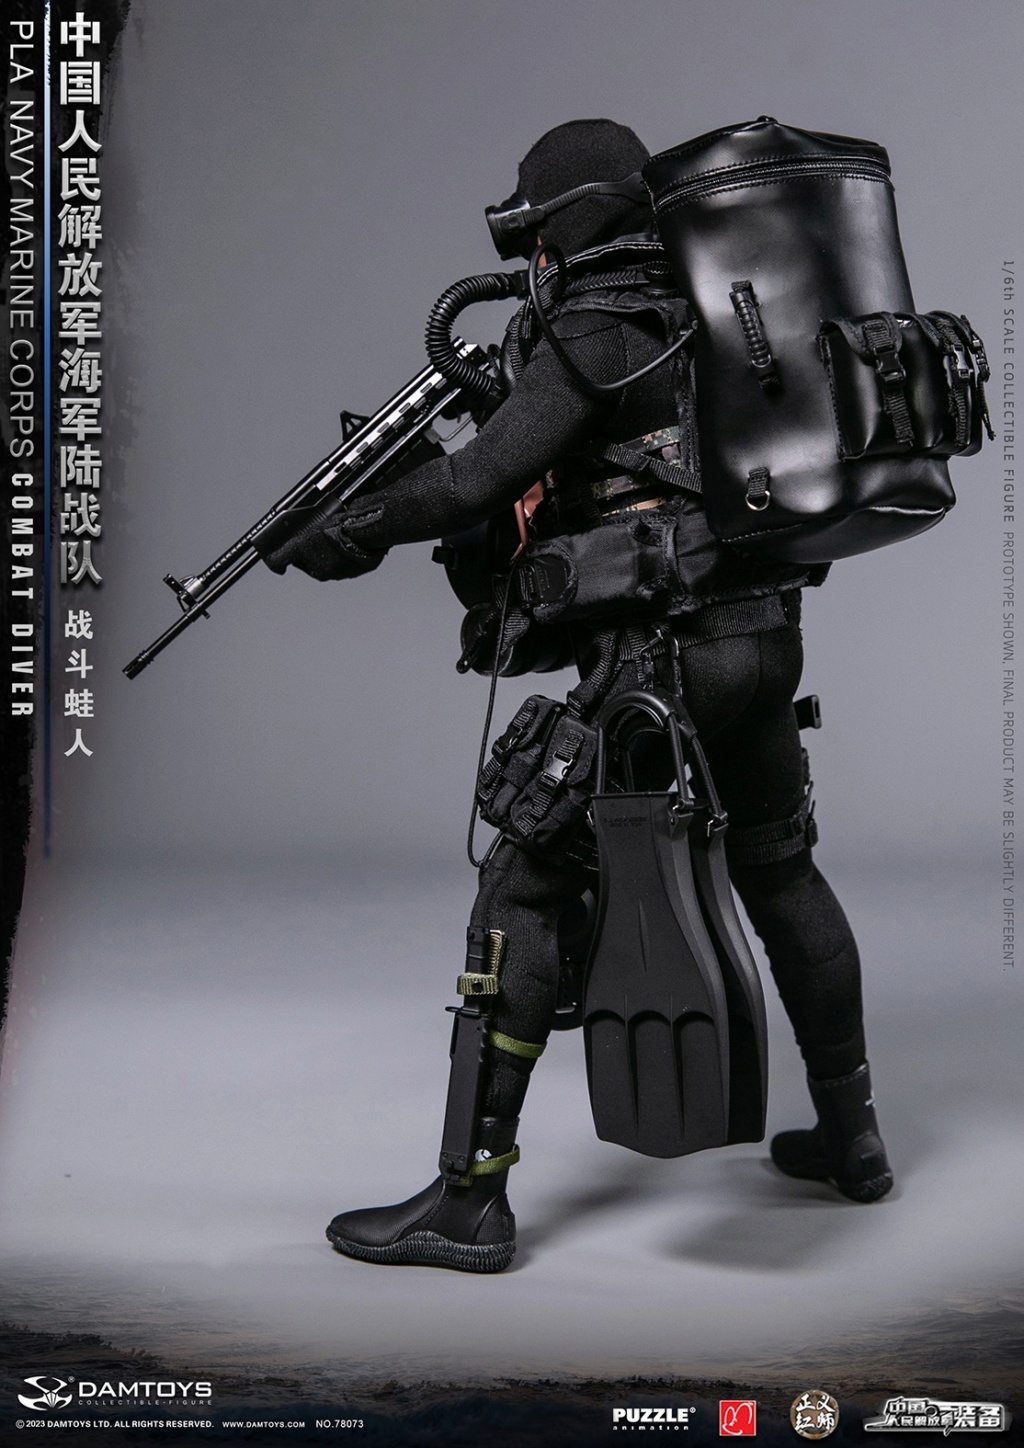 newproduct - NEW PRODUCT: DAMToys: 1/6 Chinese People's Liberation Army Marine Corps - Combat Frogman Action Figure #78073 14295710